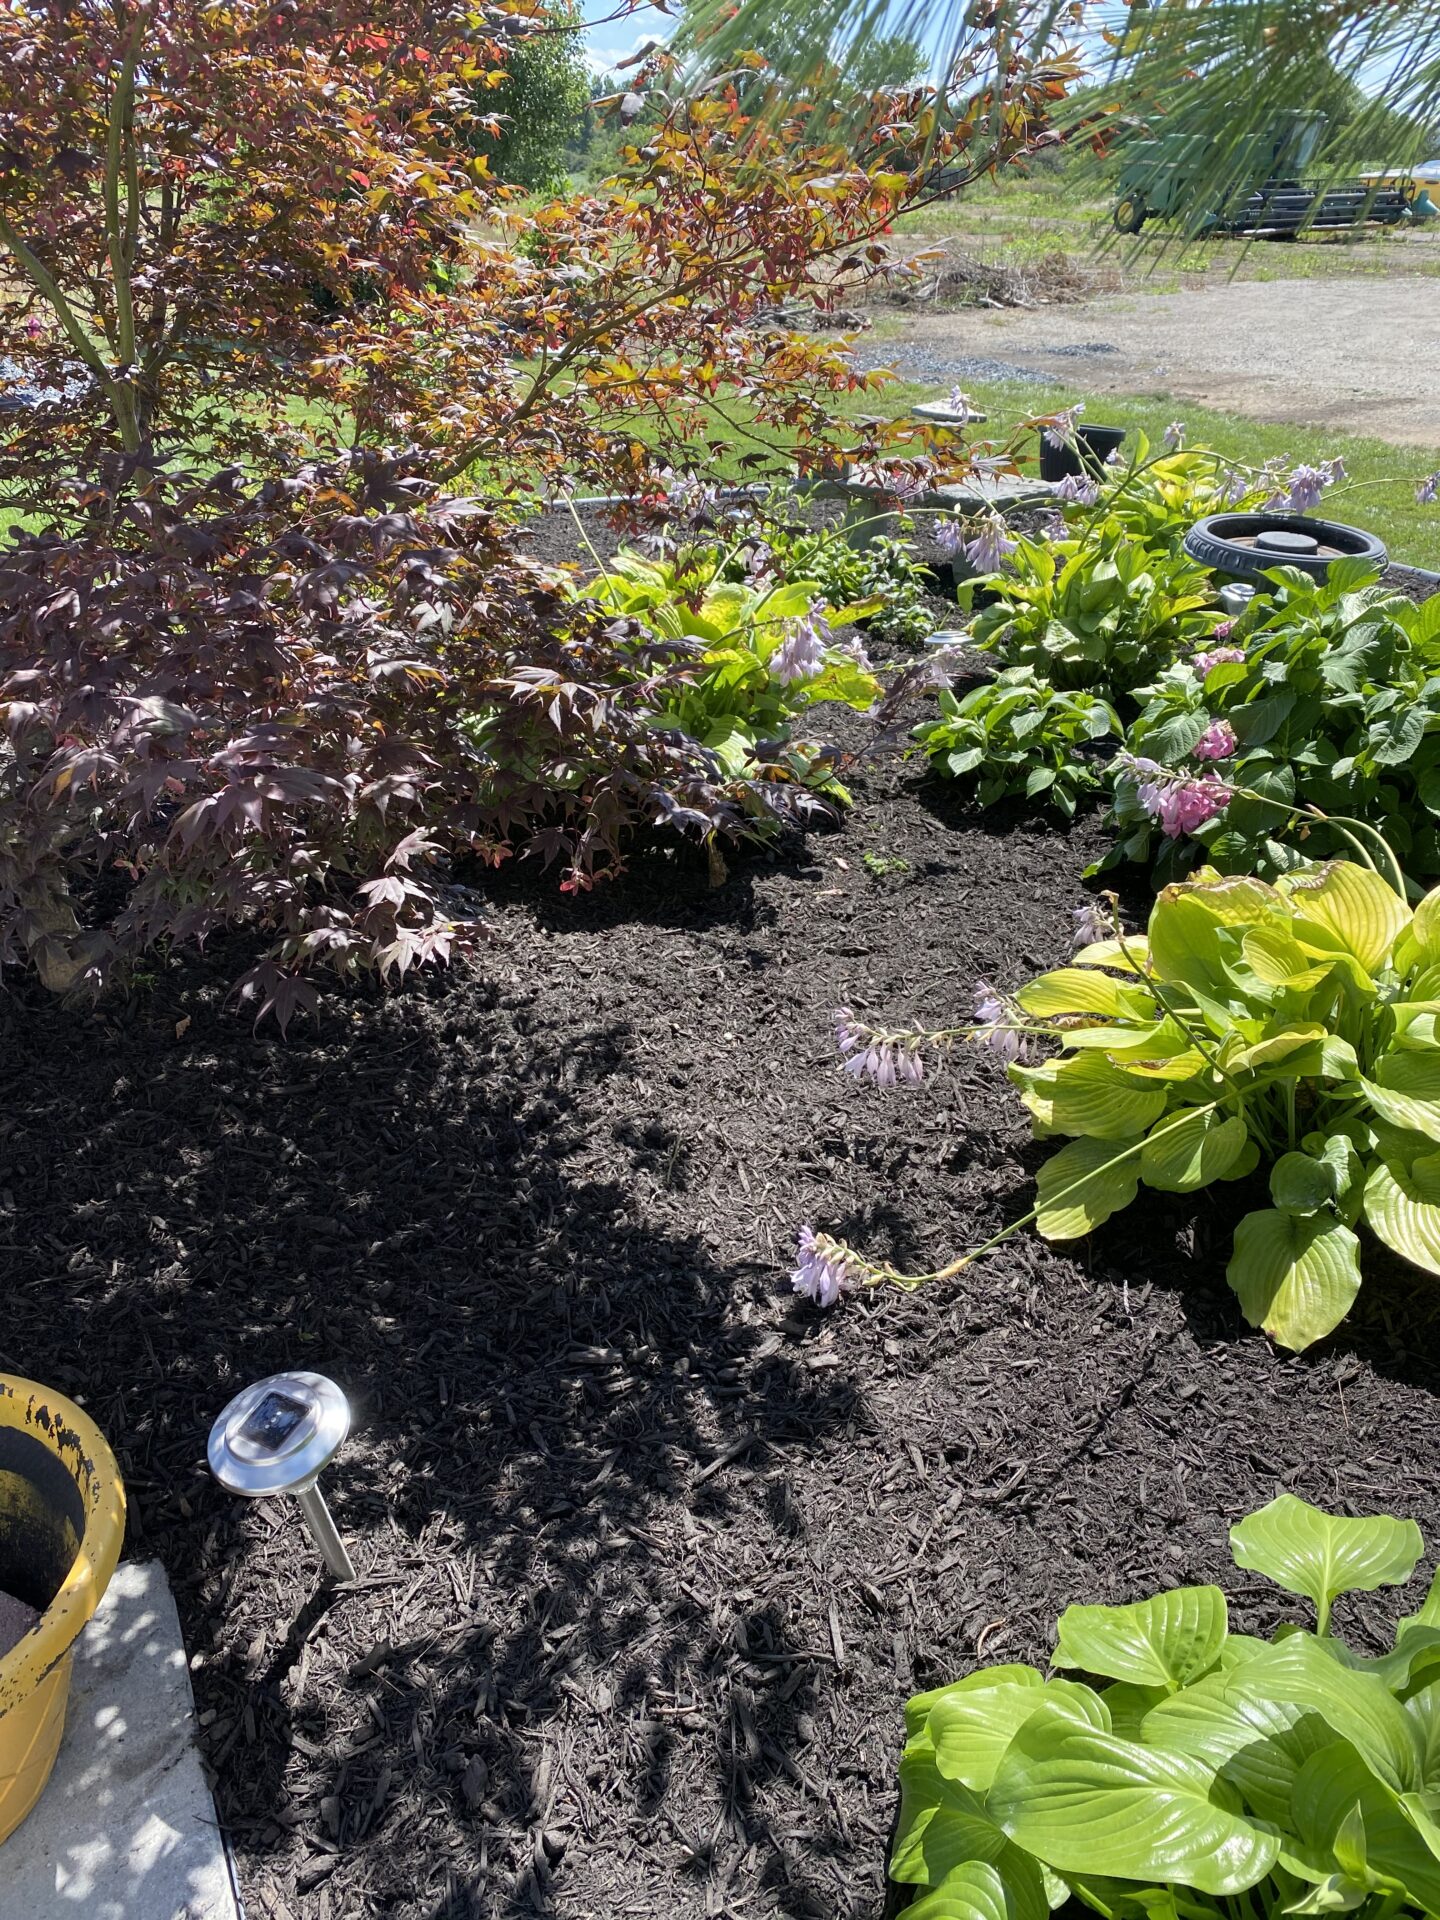 A well-maintained garden with rich, dark mulch, various healthy plants, a solar light, and a container partially visible under bright sunlight.